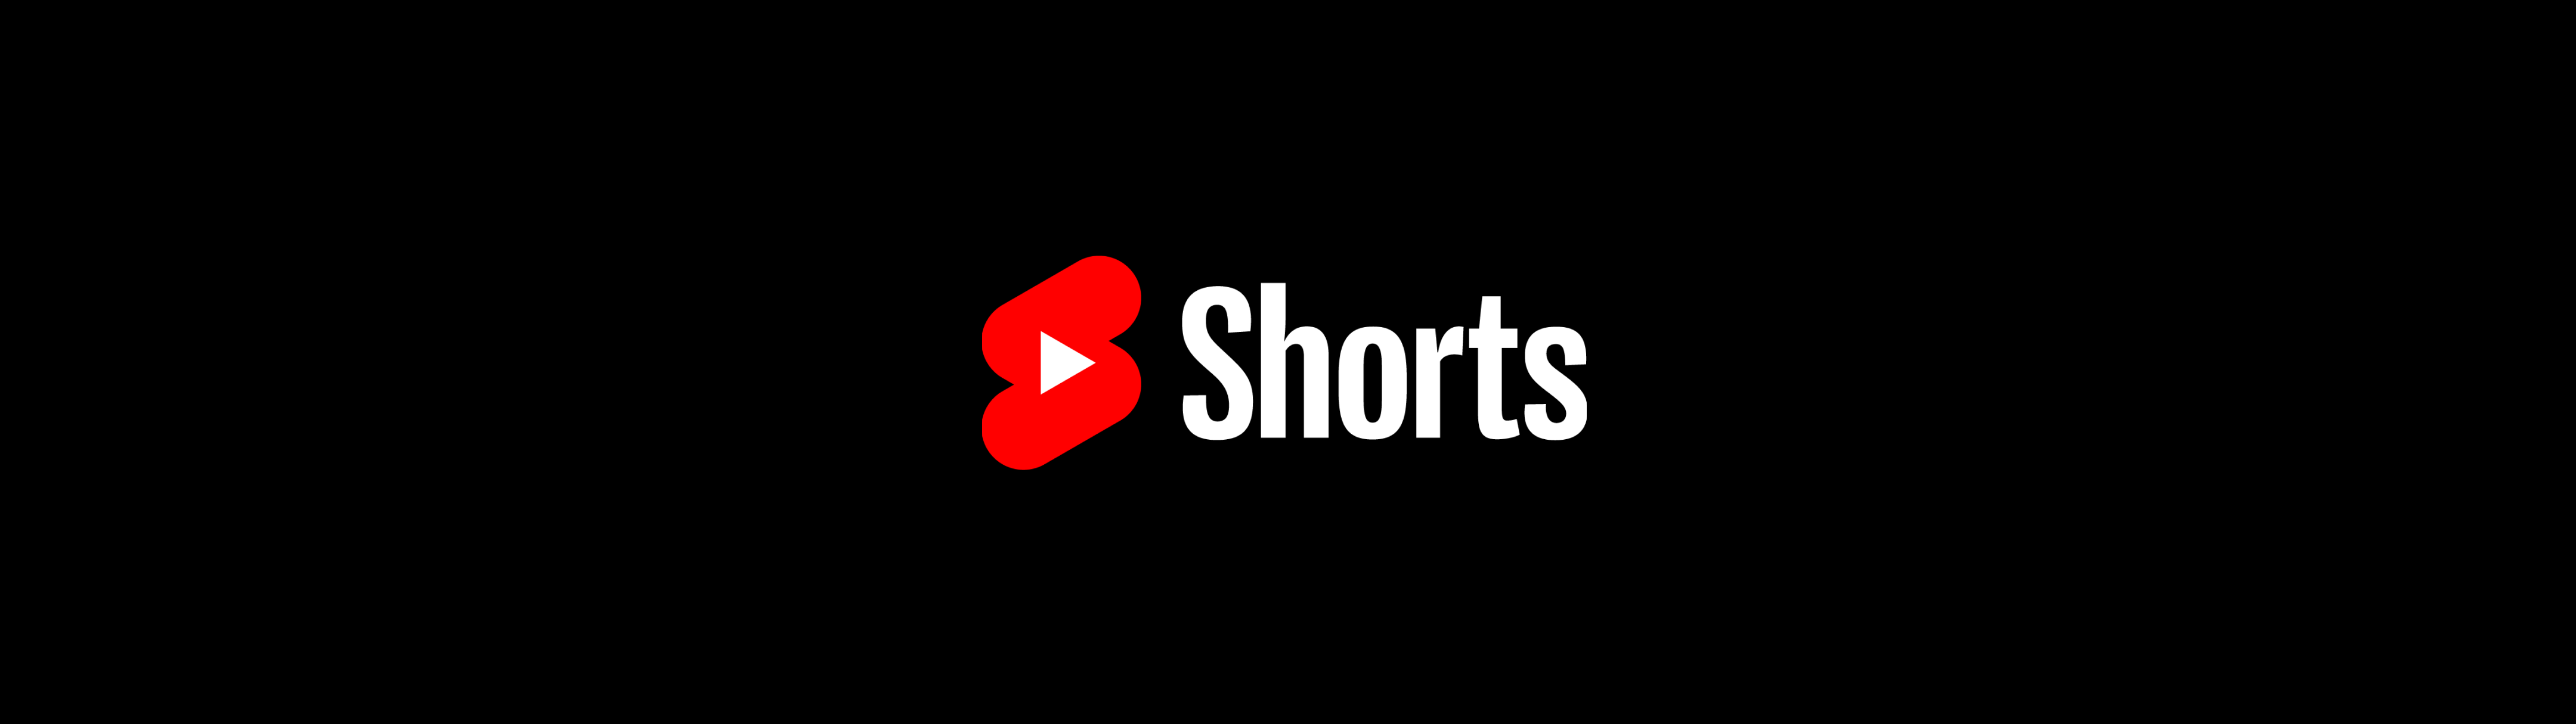 Everything you need to know to use YouTube Shorts as an artist